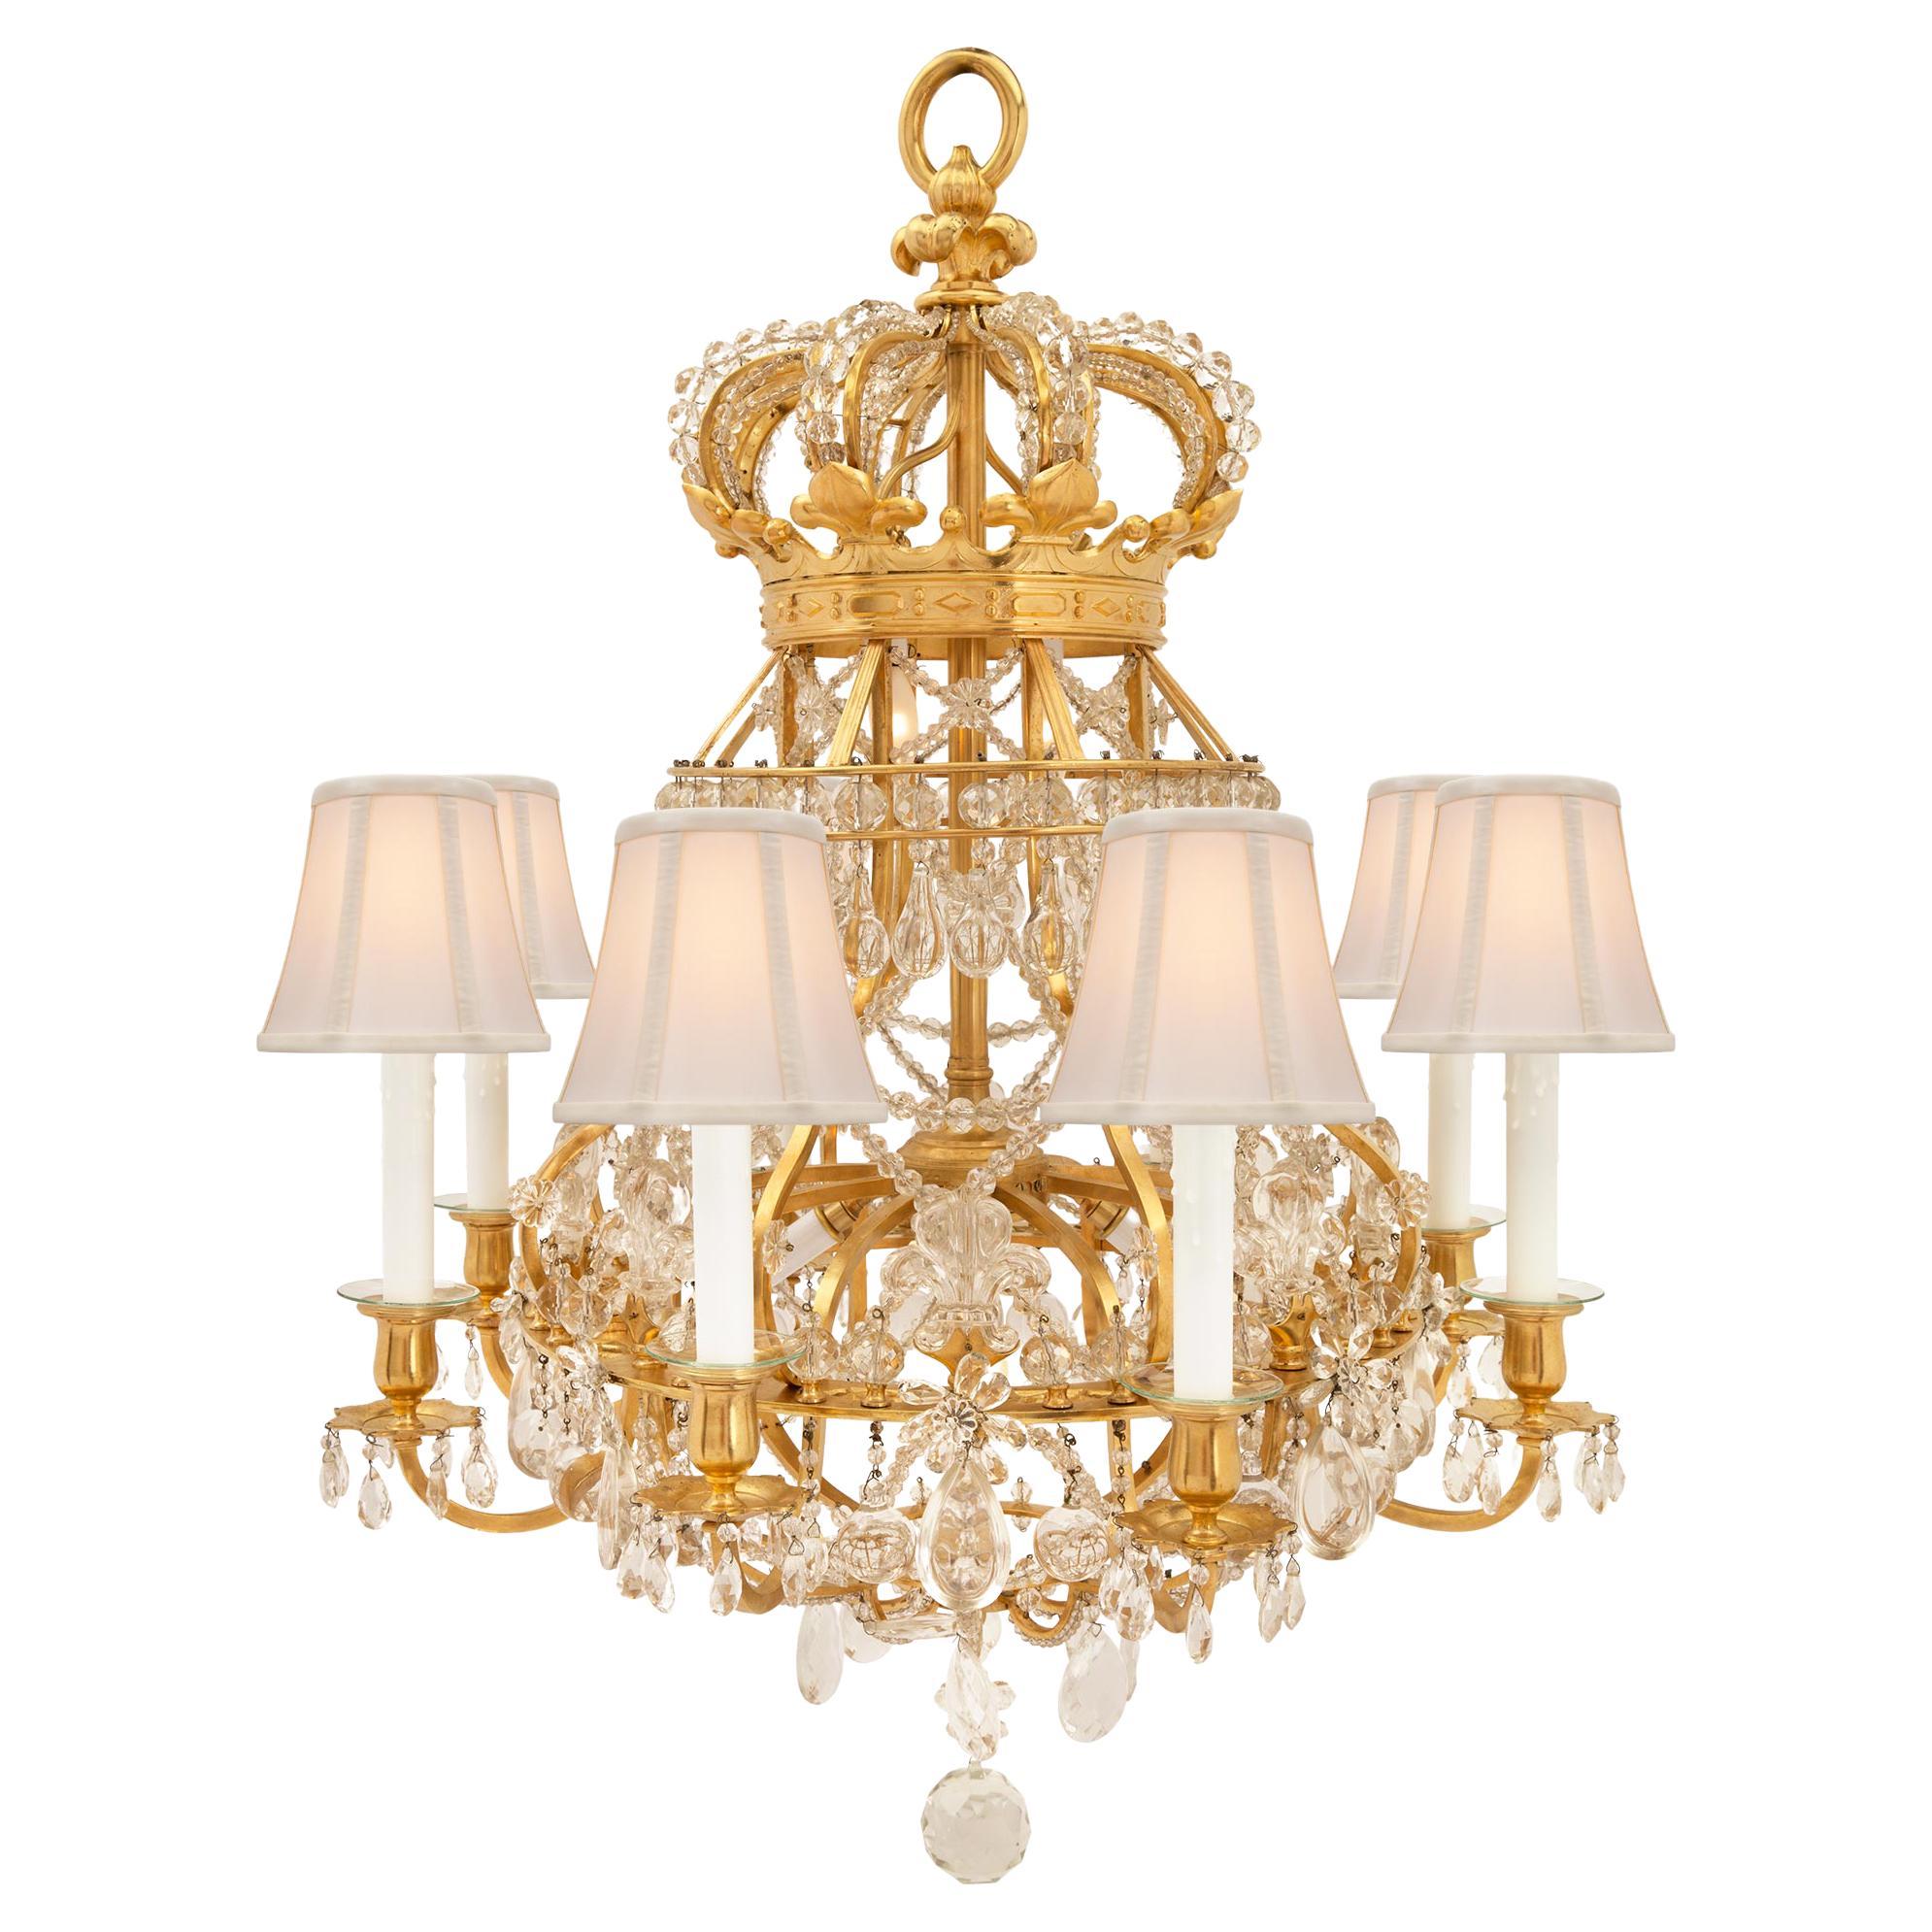 French 19th Century Louis XIV Style Ormolu, Crystal and Glass Royal Chandelier For Sale